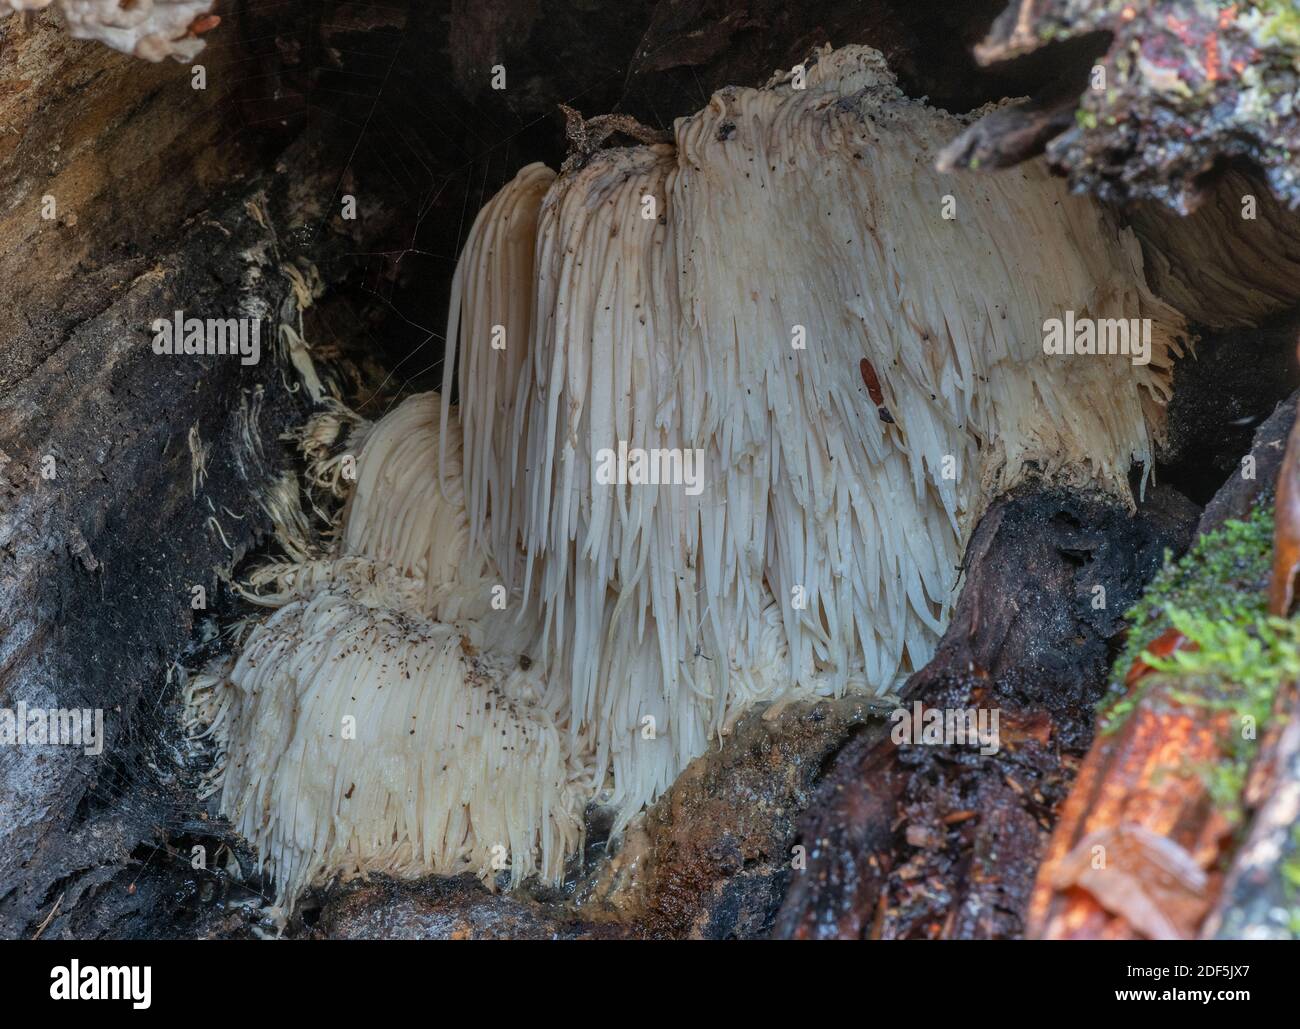 Clump of Bearded Tooth, Hericium erinaceus, fungus in a hollow beech log, New Forest. Stock Photo